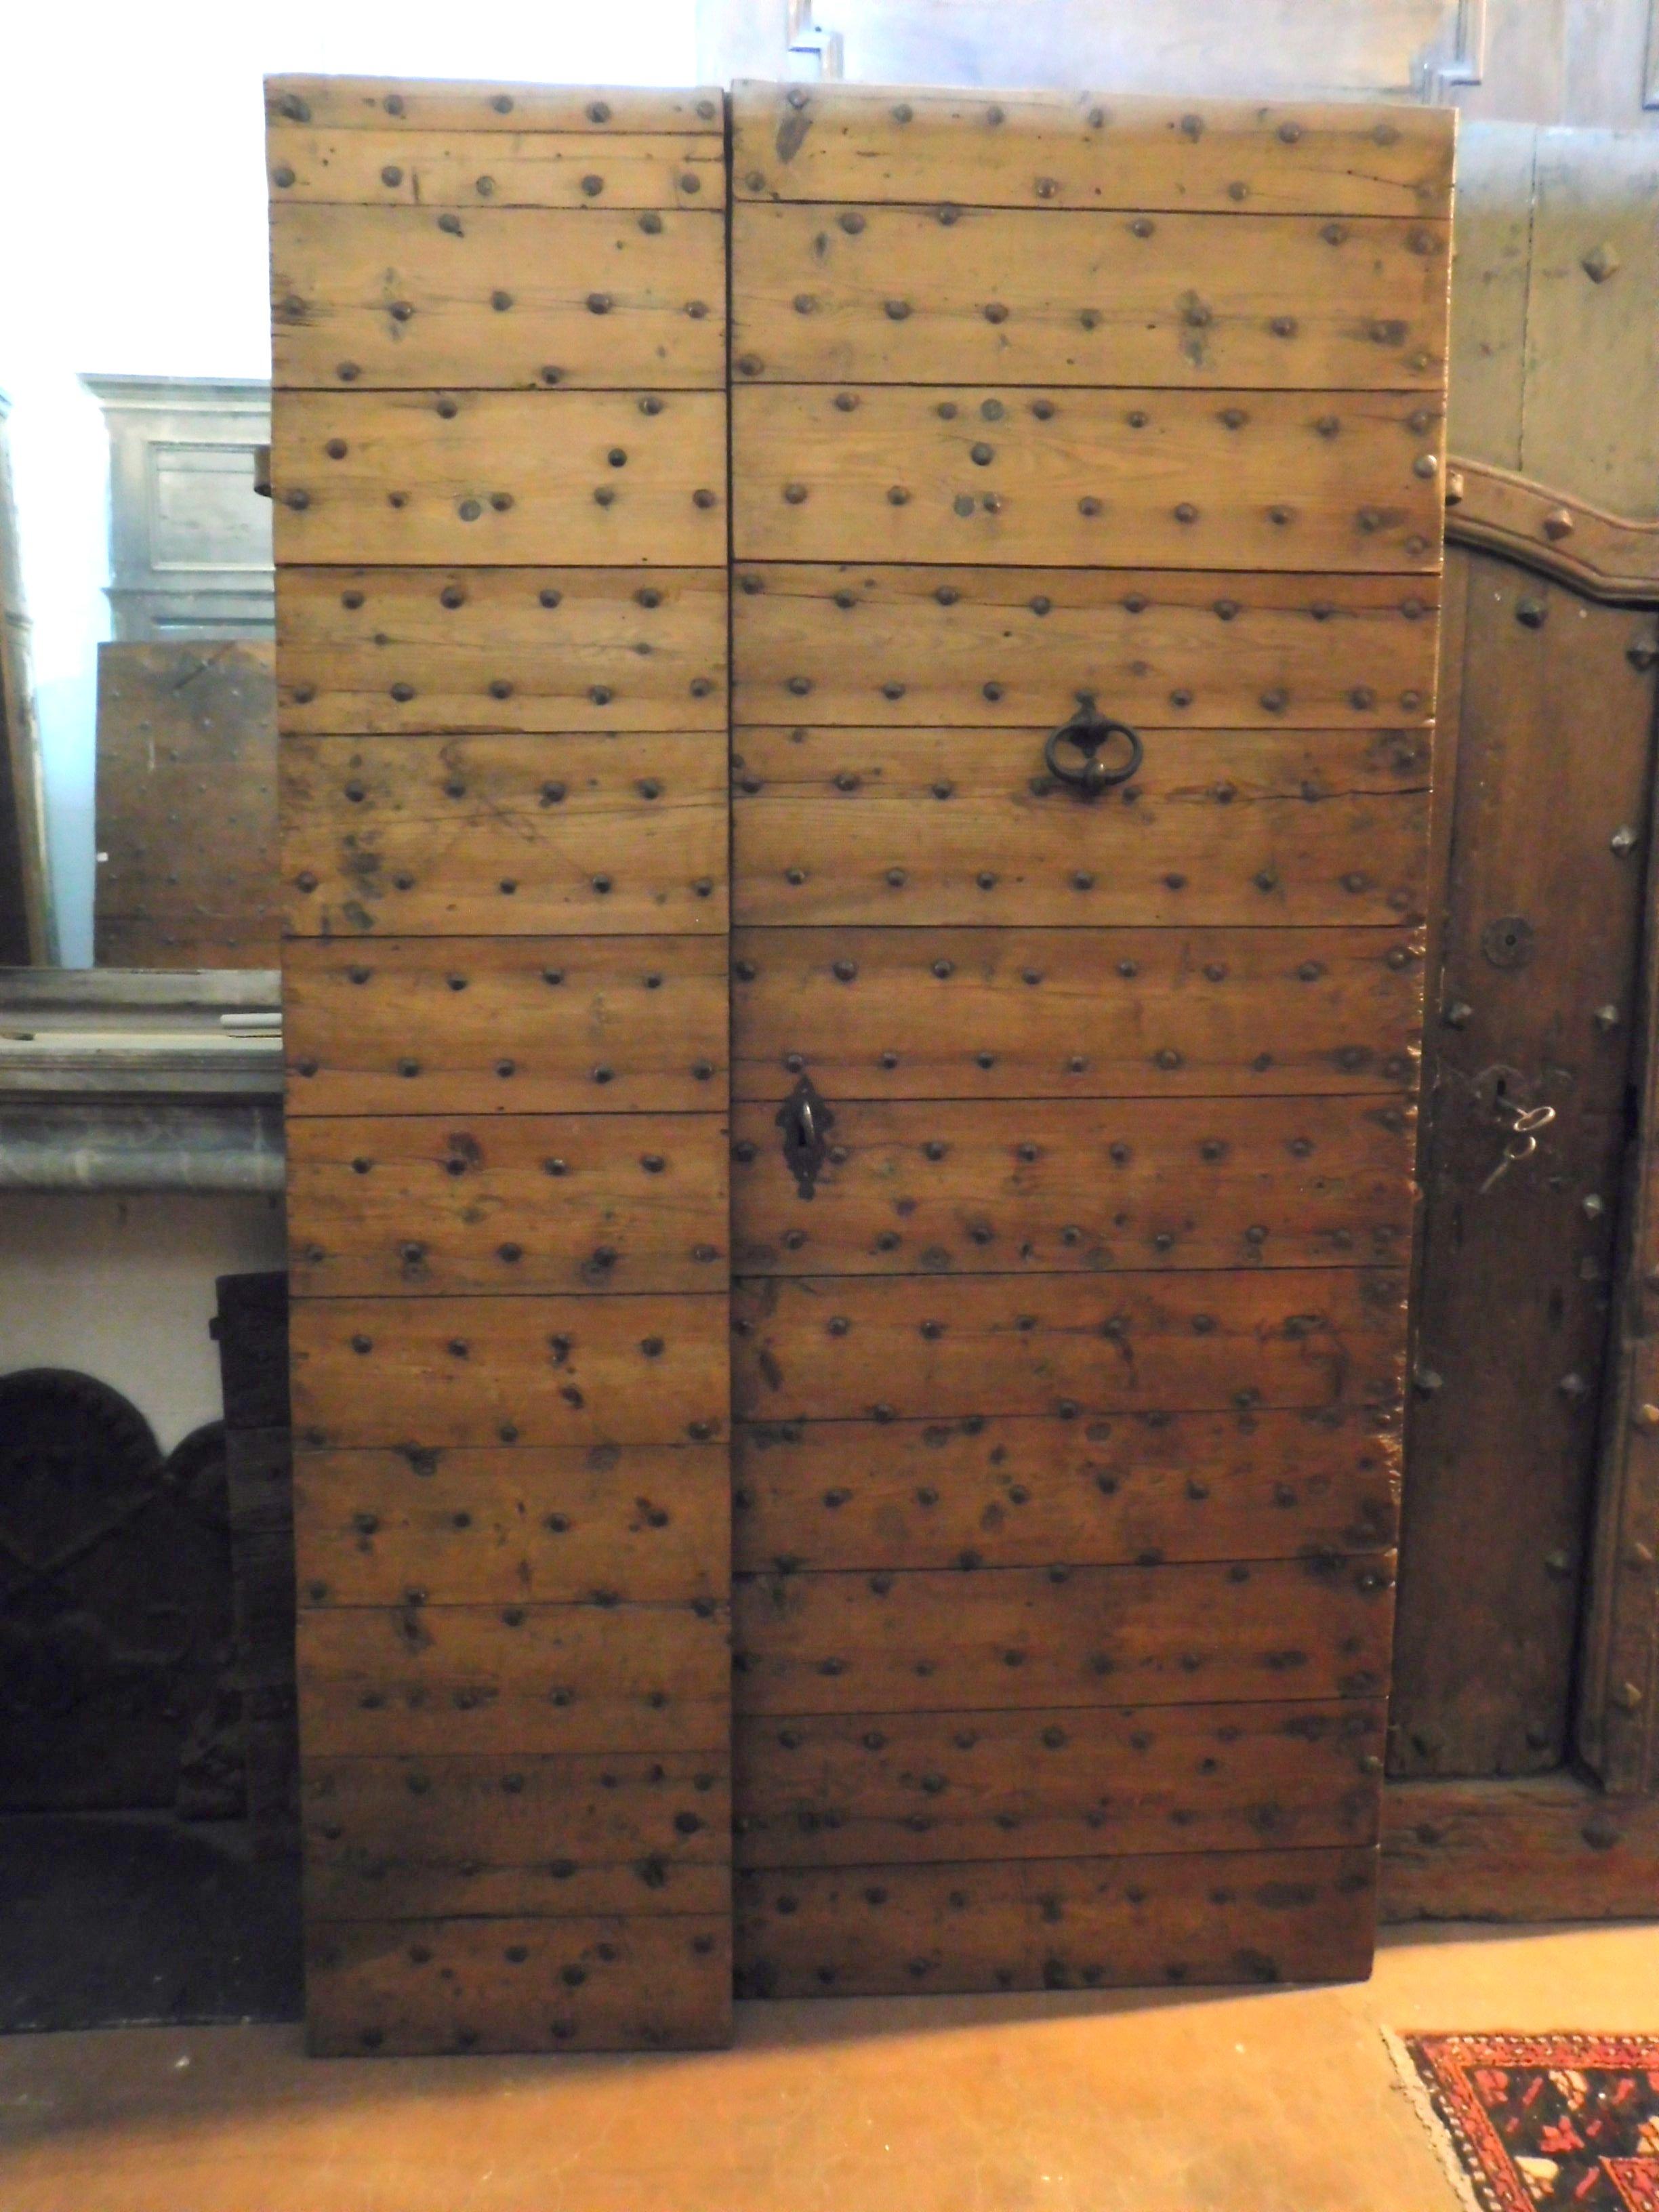 Antique entrance door in larch wood, with nails, rustic flavor, handmade in the 1700 in Italy, this particular entrance door has original needles and handles, nice thickened, usually opened 2/3 of the right and yes opened the remaining 1/3 when